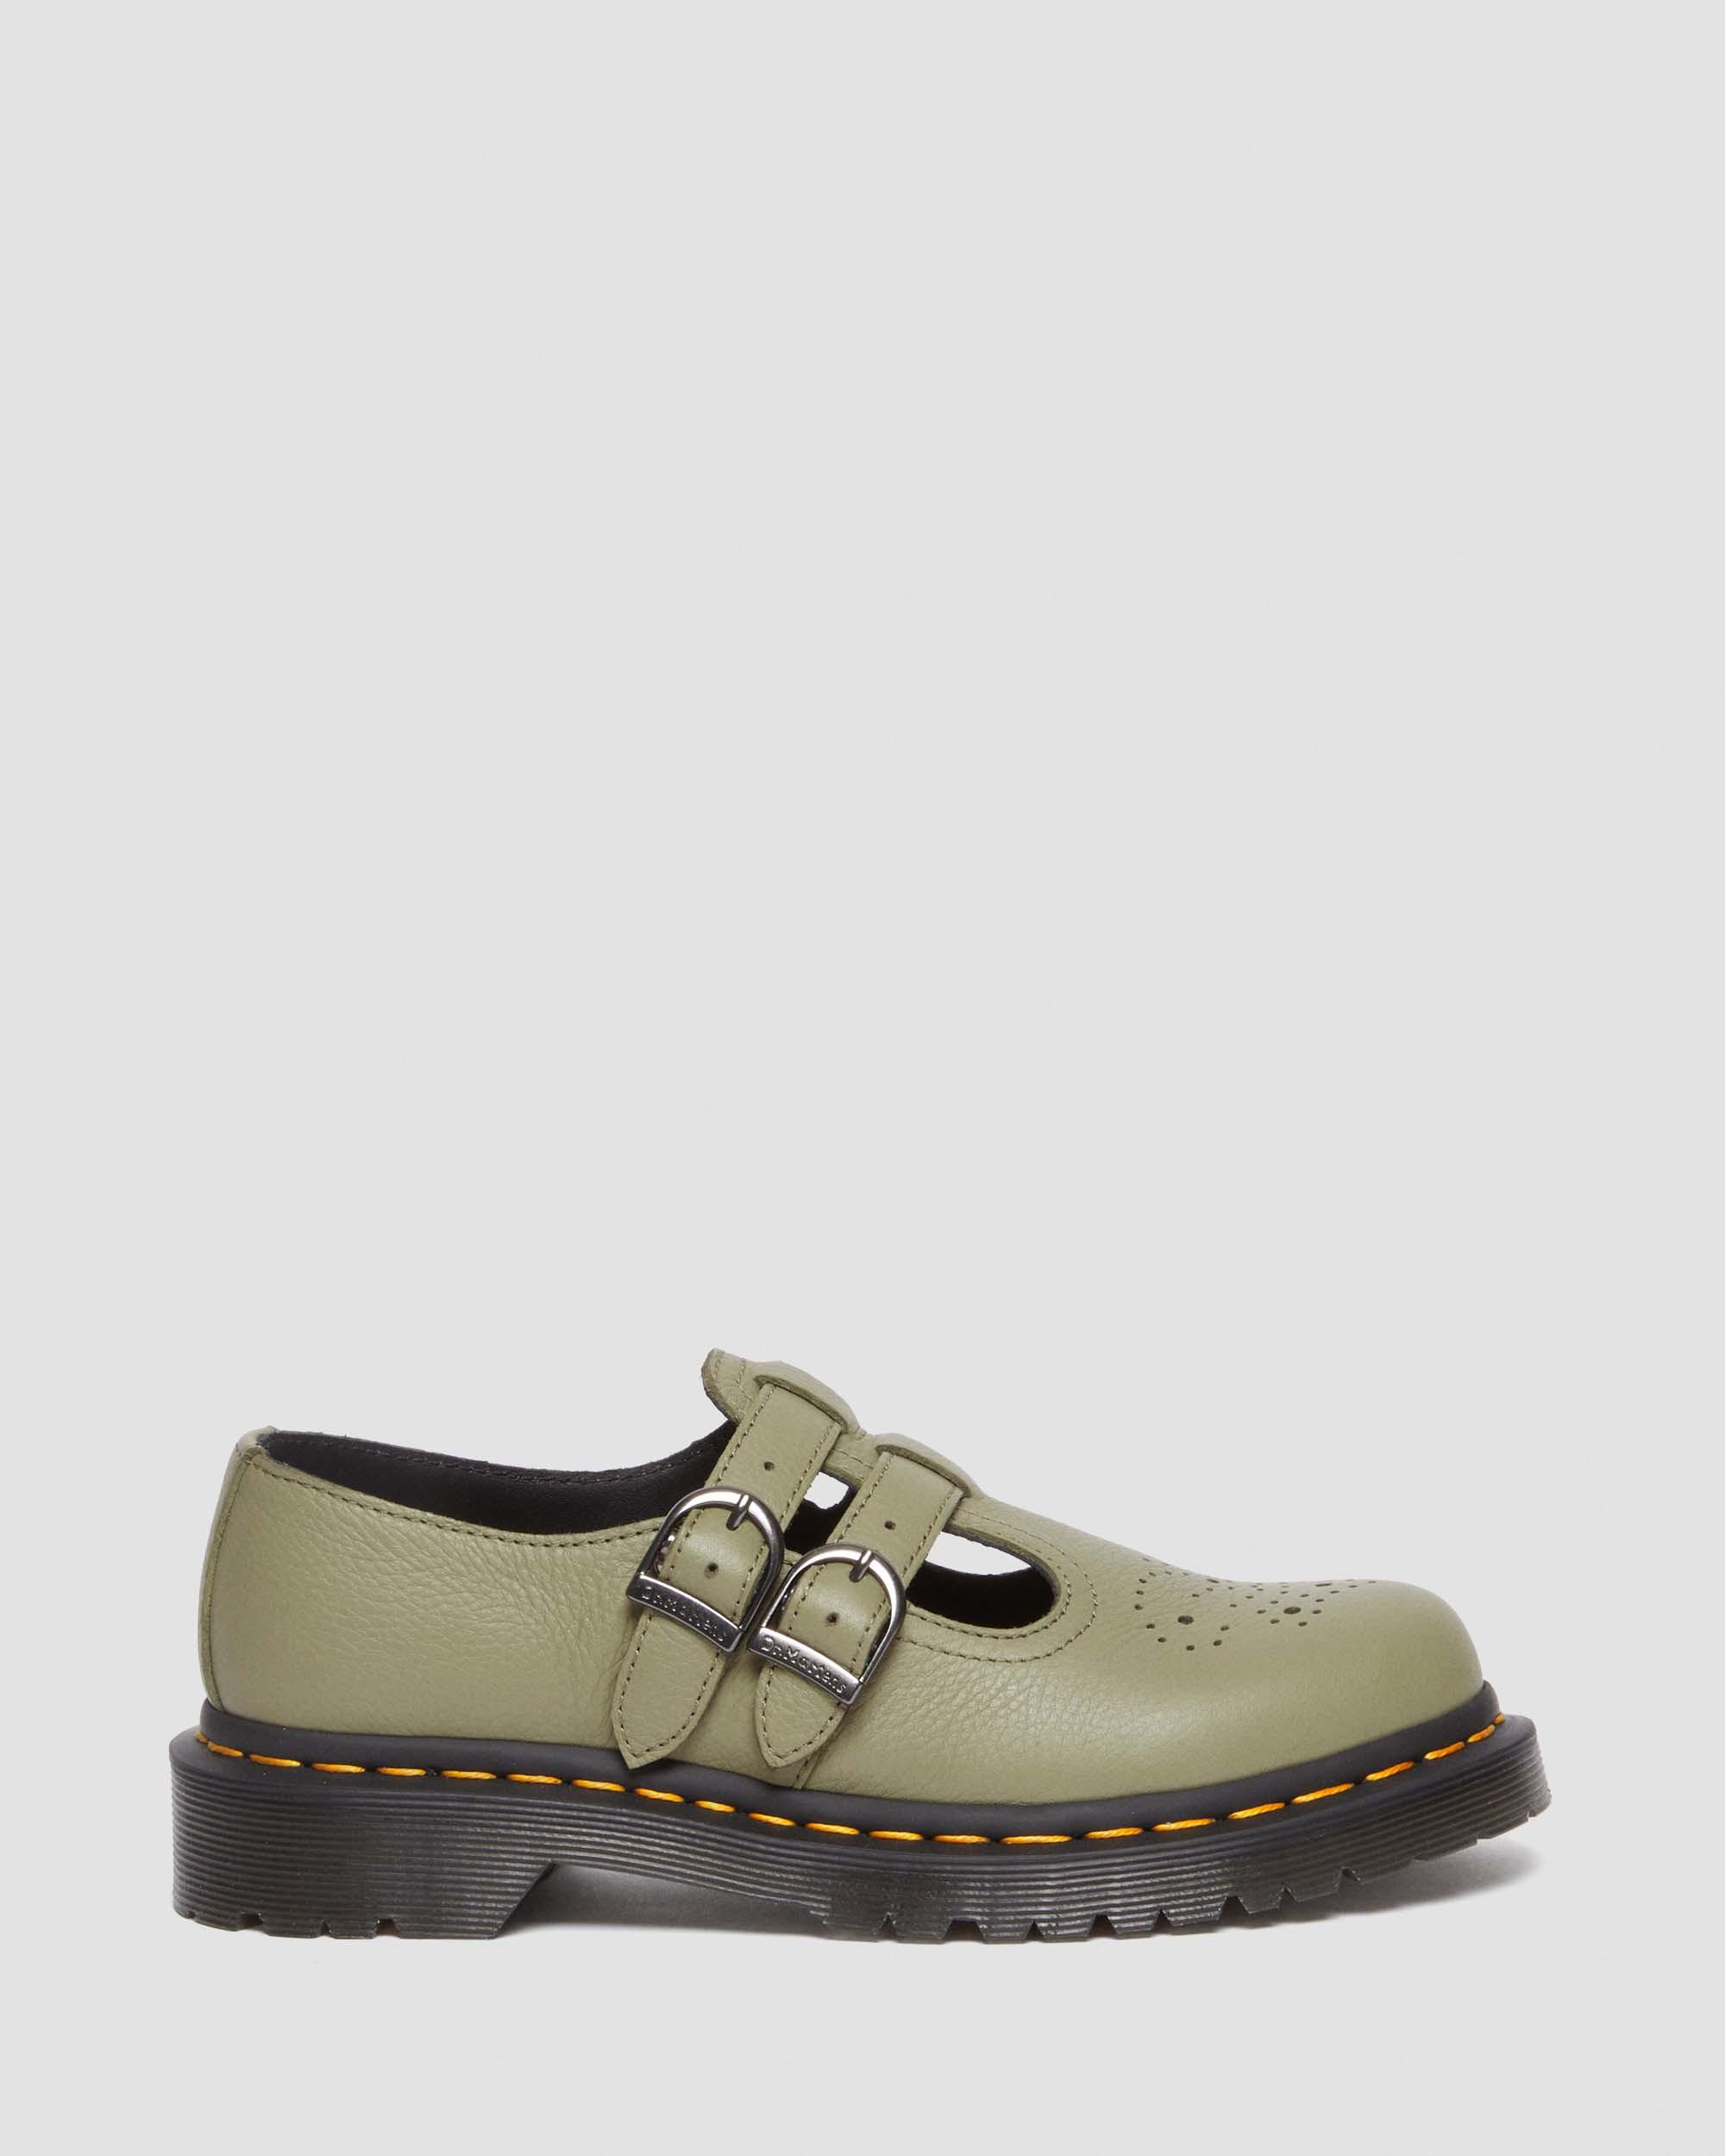 8065 Virginia Leather Mary Jane Shoes in Muted Olive